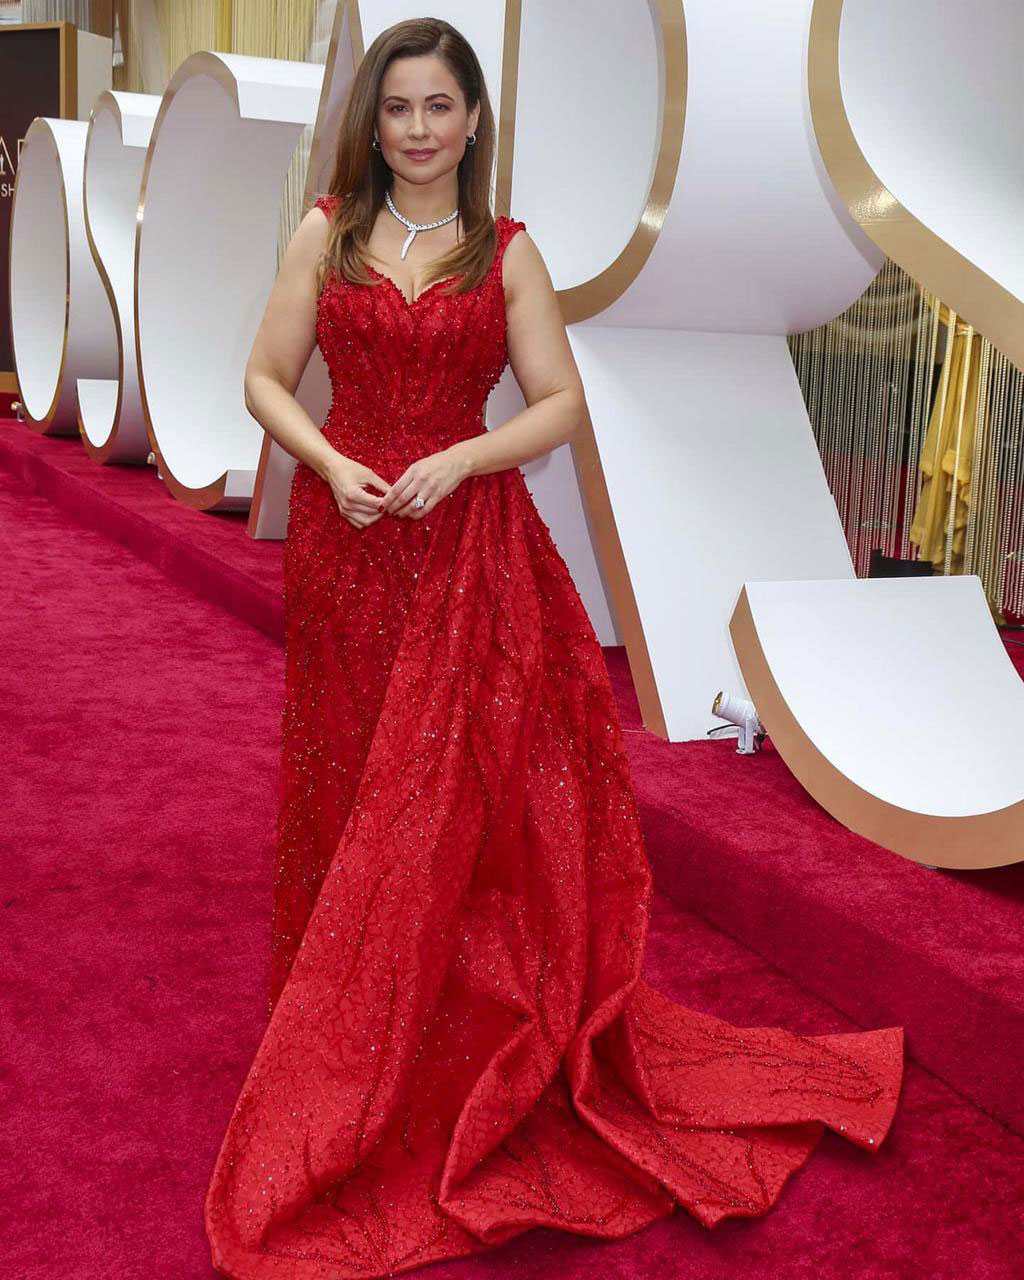 In Naja Saade Red Gown on the Red Carpet of The Oscars 2020